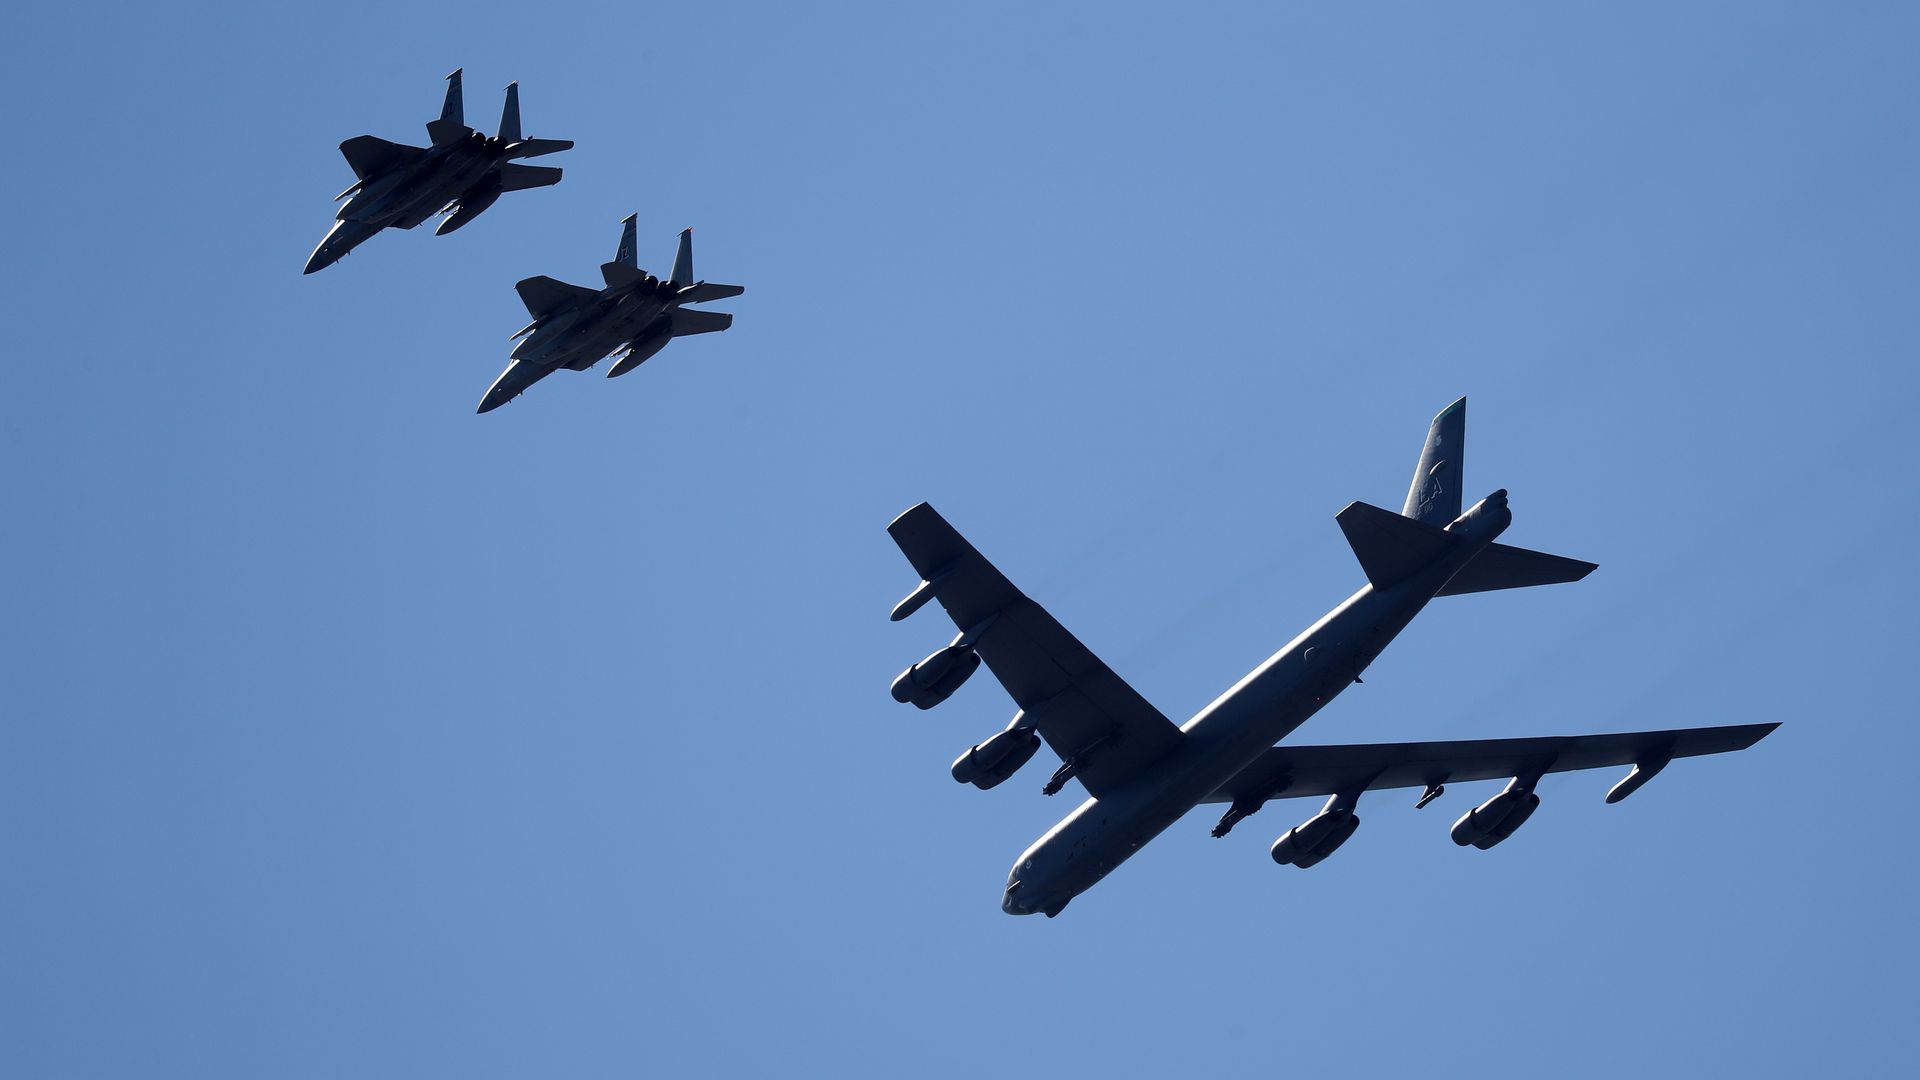 A B-52 Bombers and two F-15 fighter jets flying over in New Orleans in May 2020.